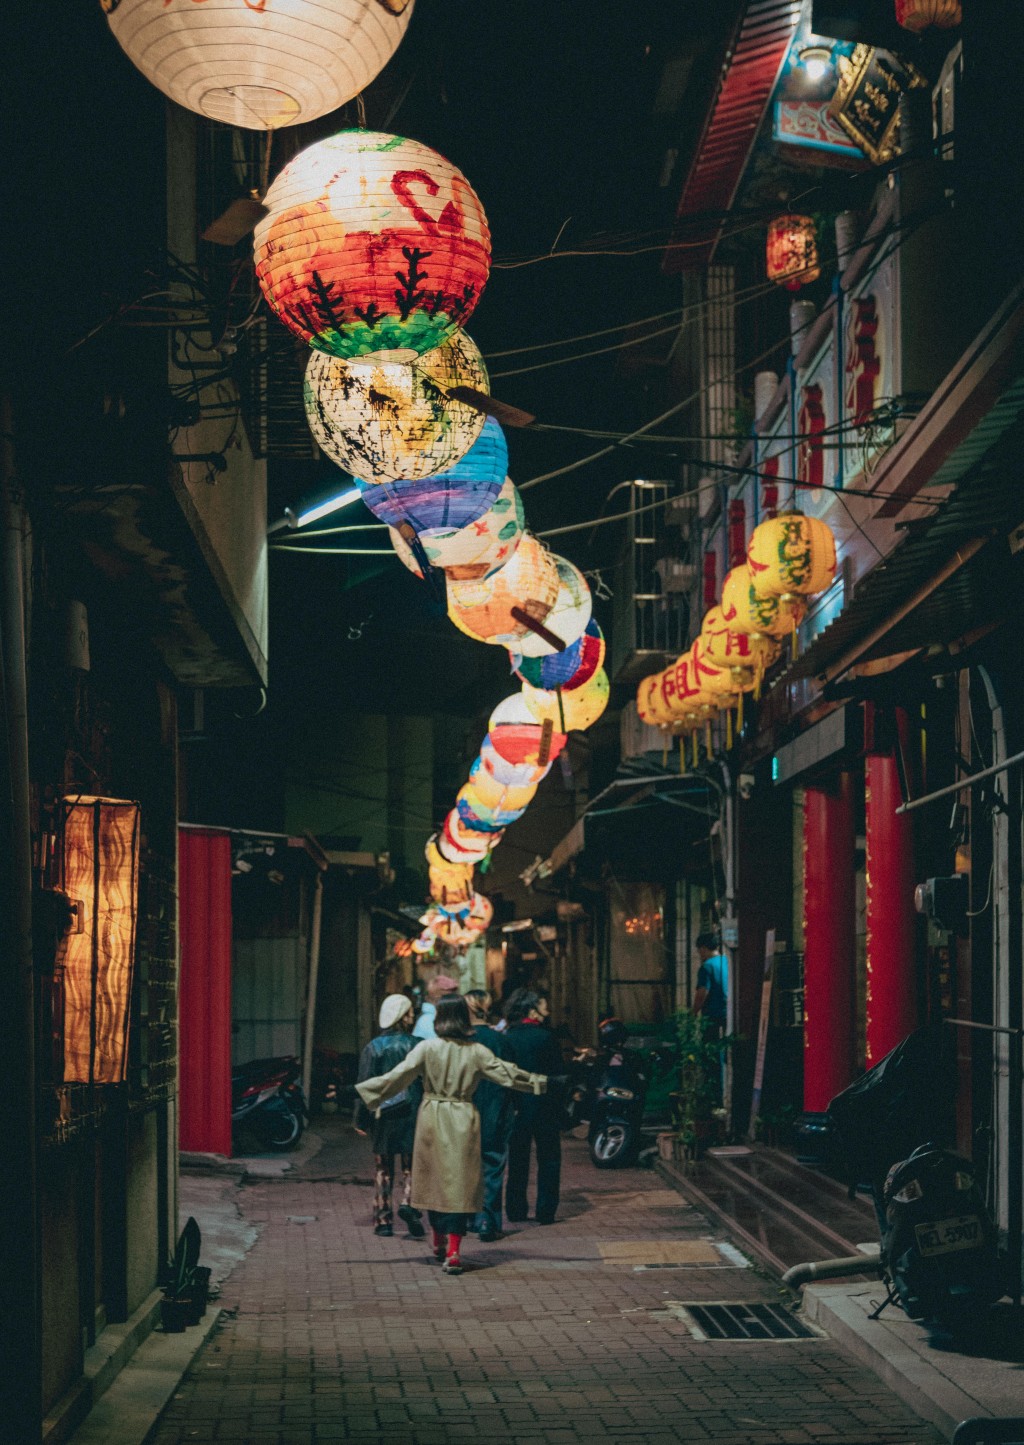 Photo of the Day: Lantern-lit alley in Taiwan's Tainan